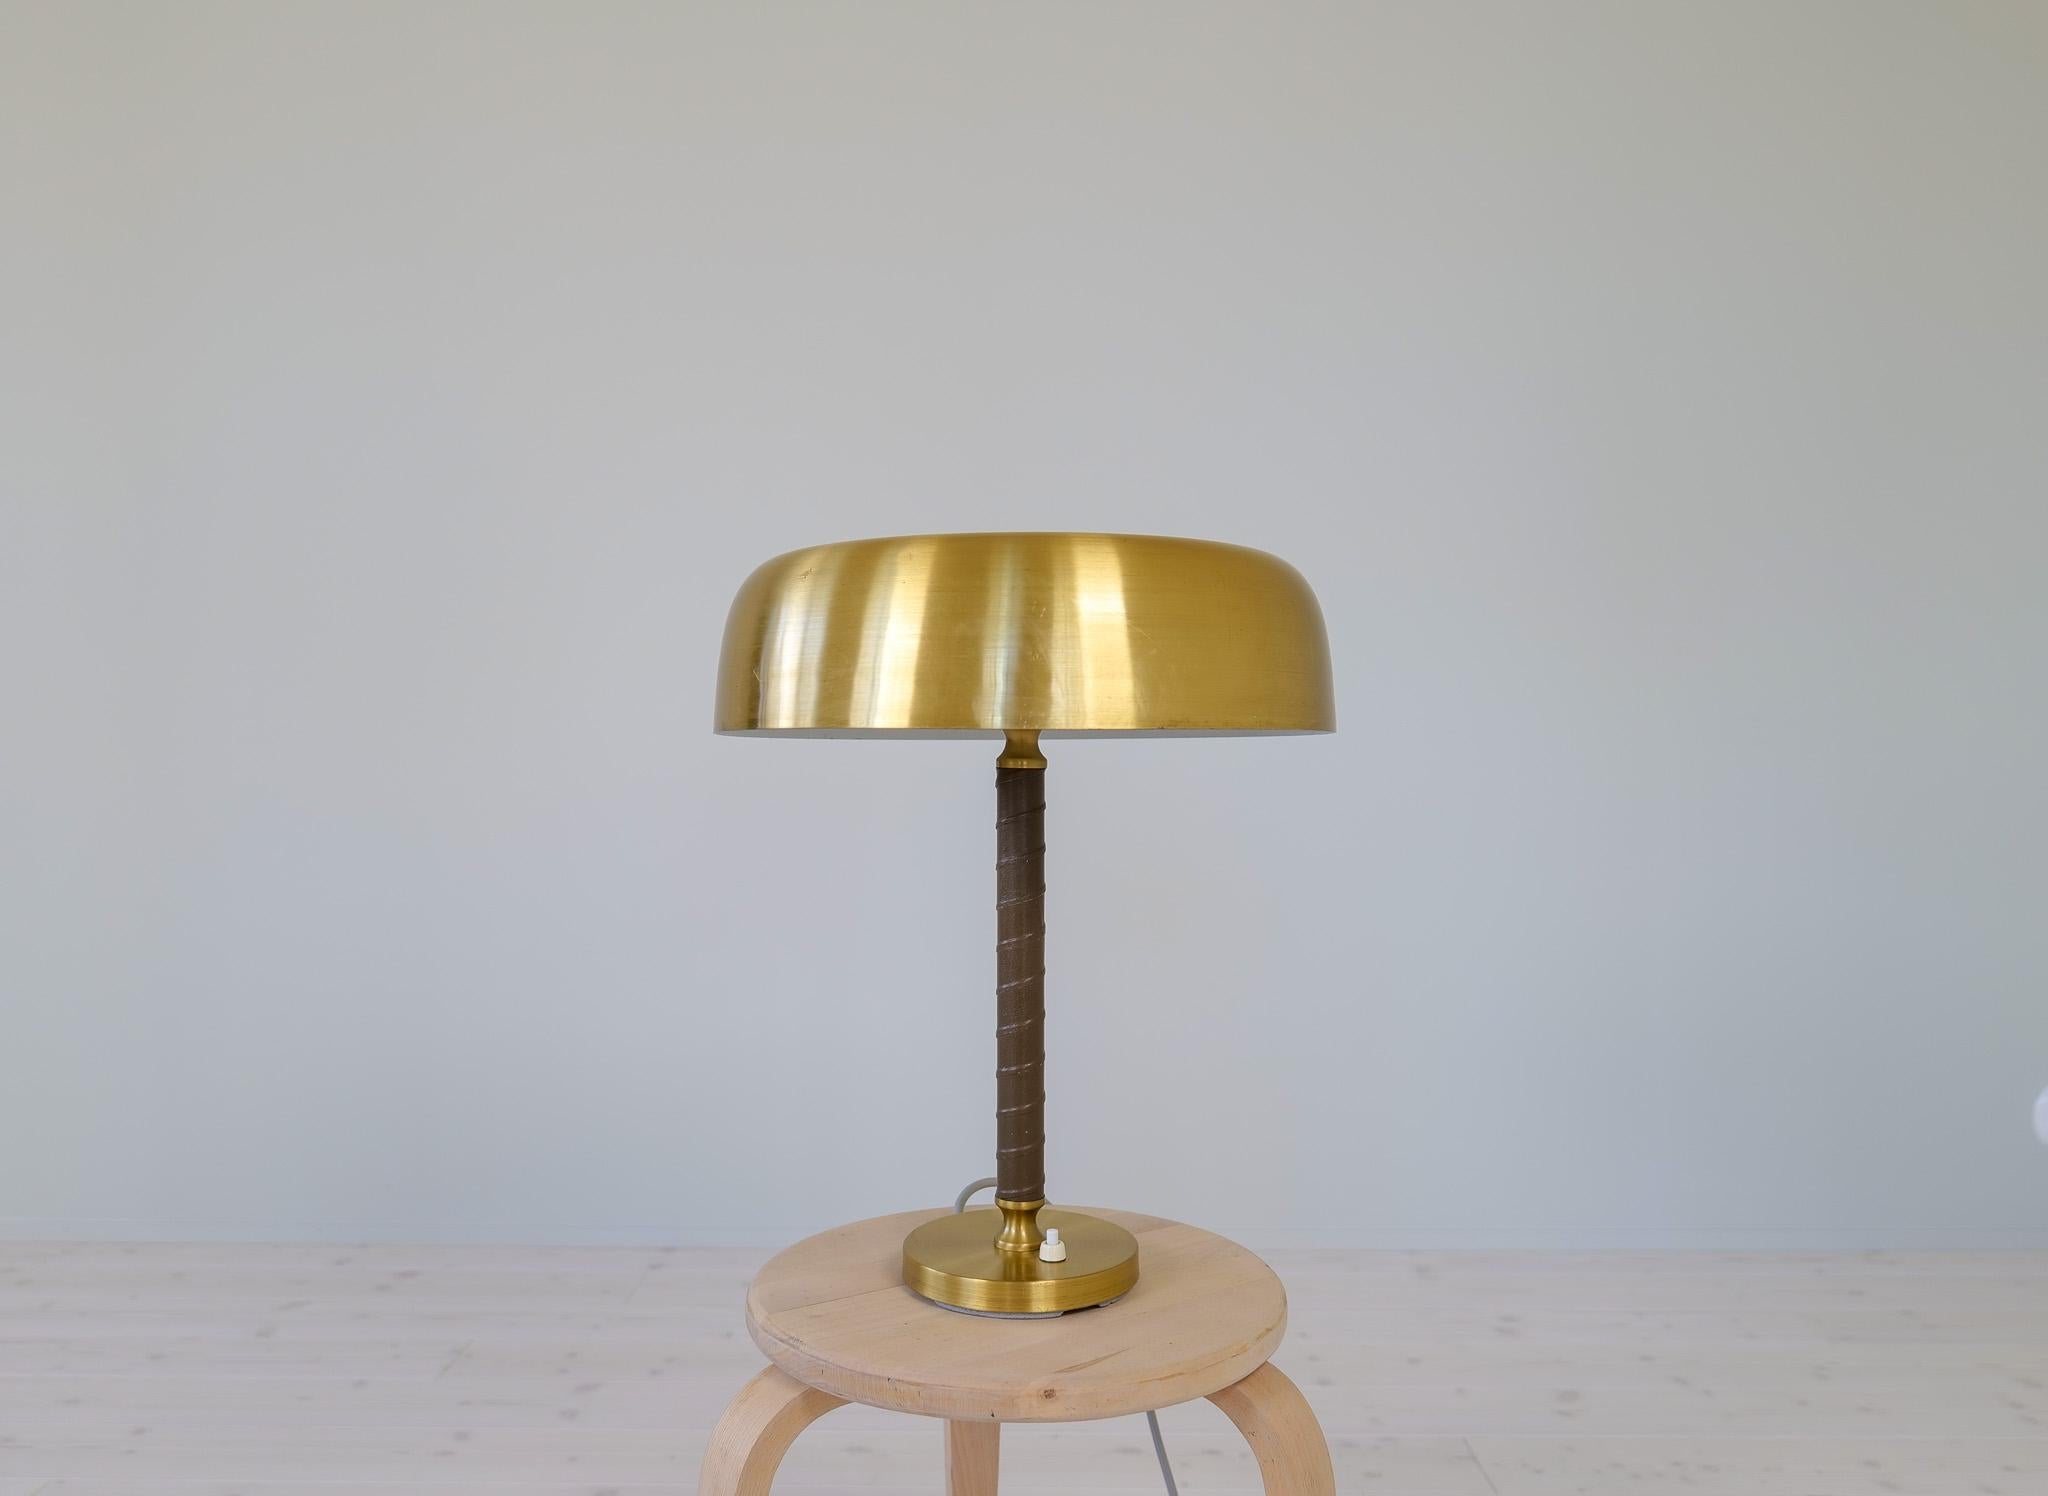 Wonderful table lamp in brushed brass and leather by Boréns, Sweden.
This lamp will work fine as an office lamp or will be a great addition o give a good impression and cozy light at any 
given sideboard etc. 

Condition: Good original condition